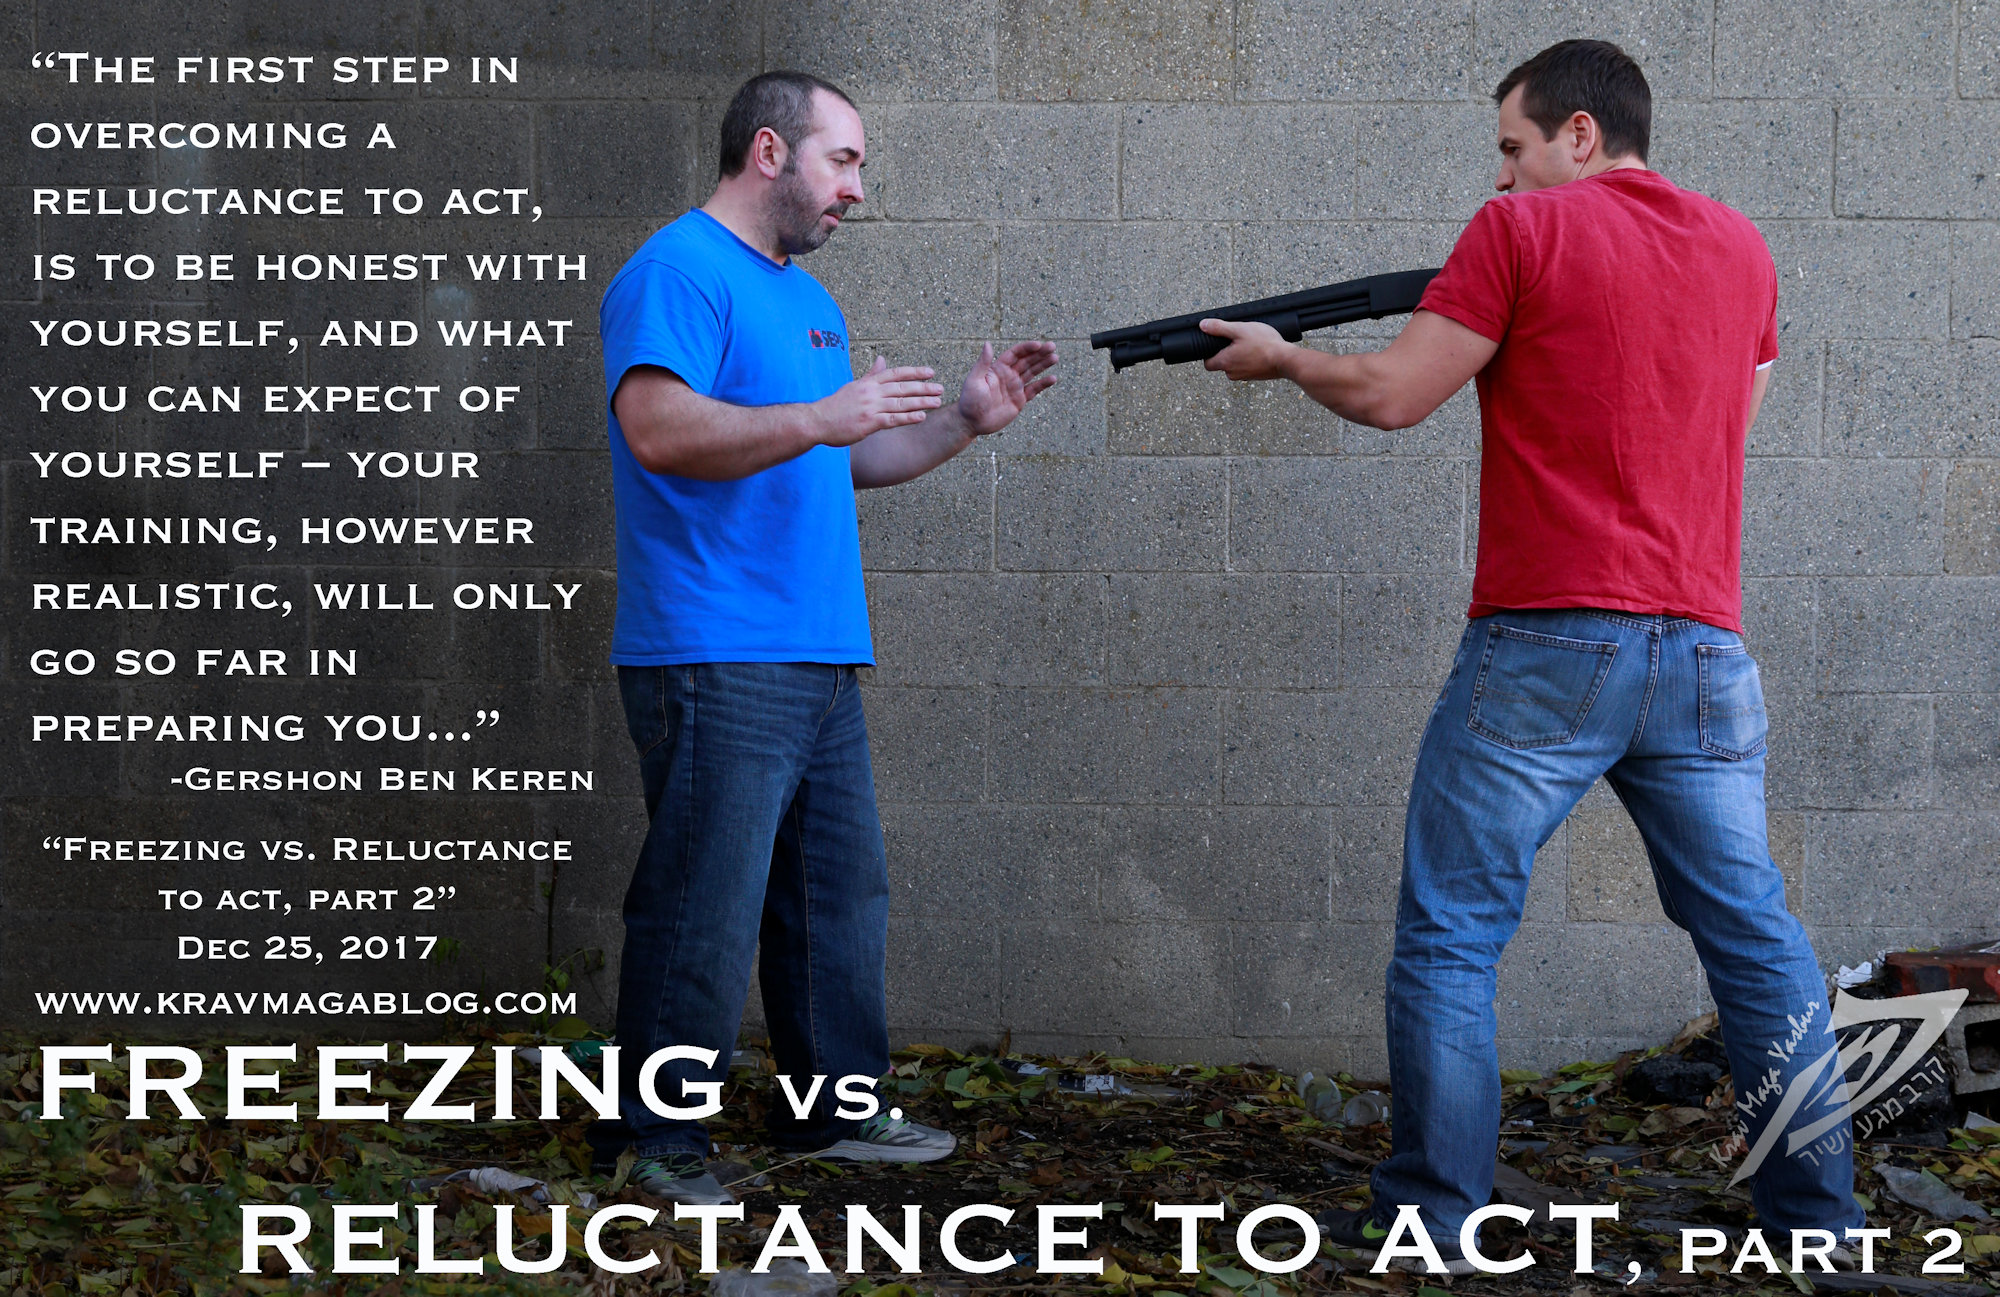 Blog About Freezing Vs Reluctance To Act (Part 2)